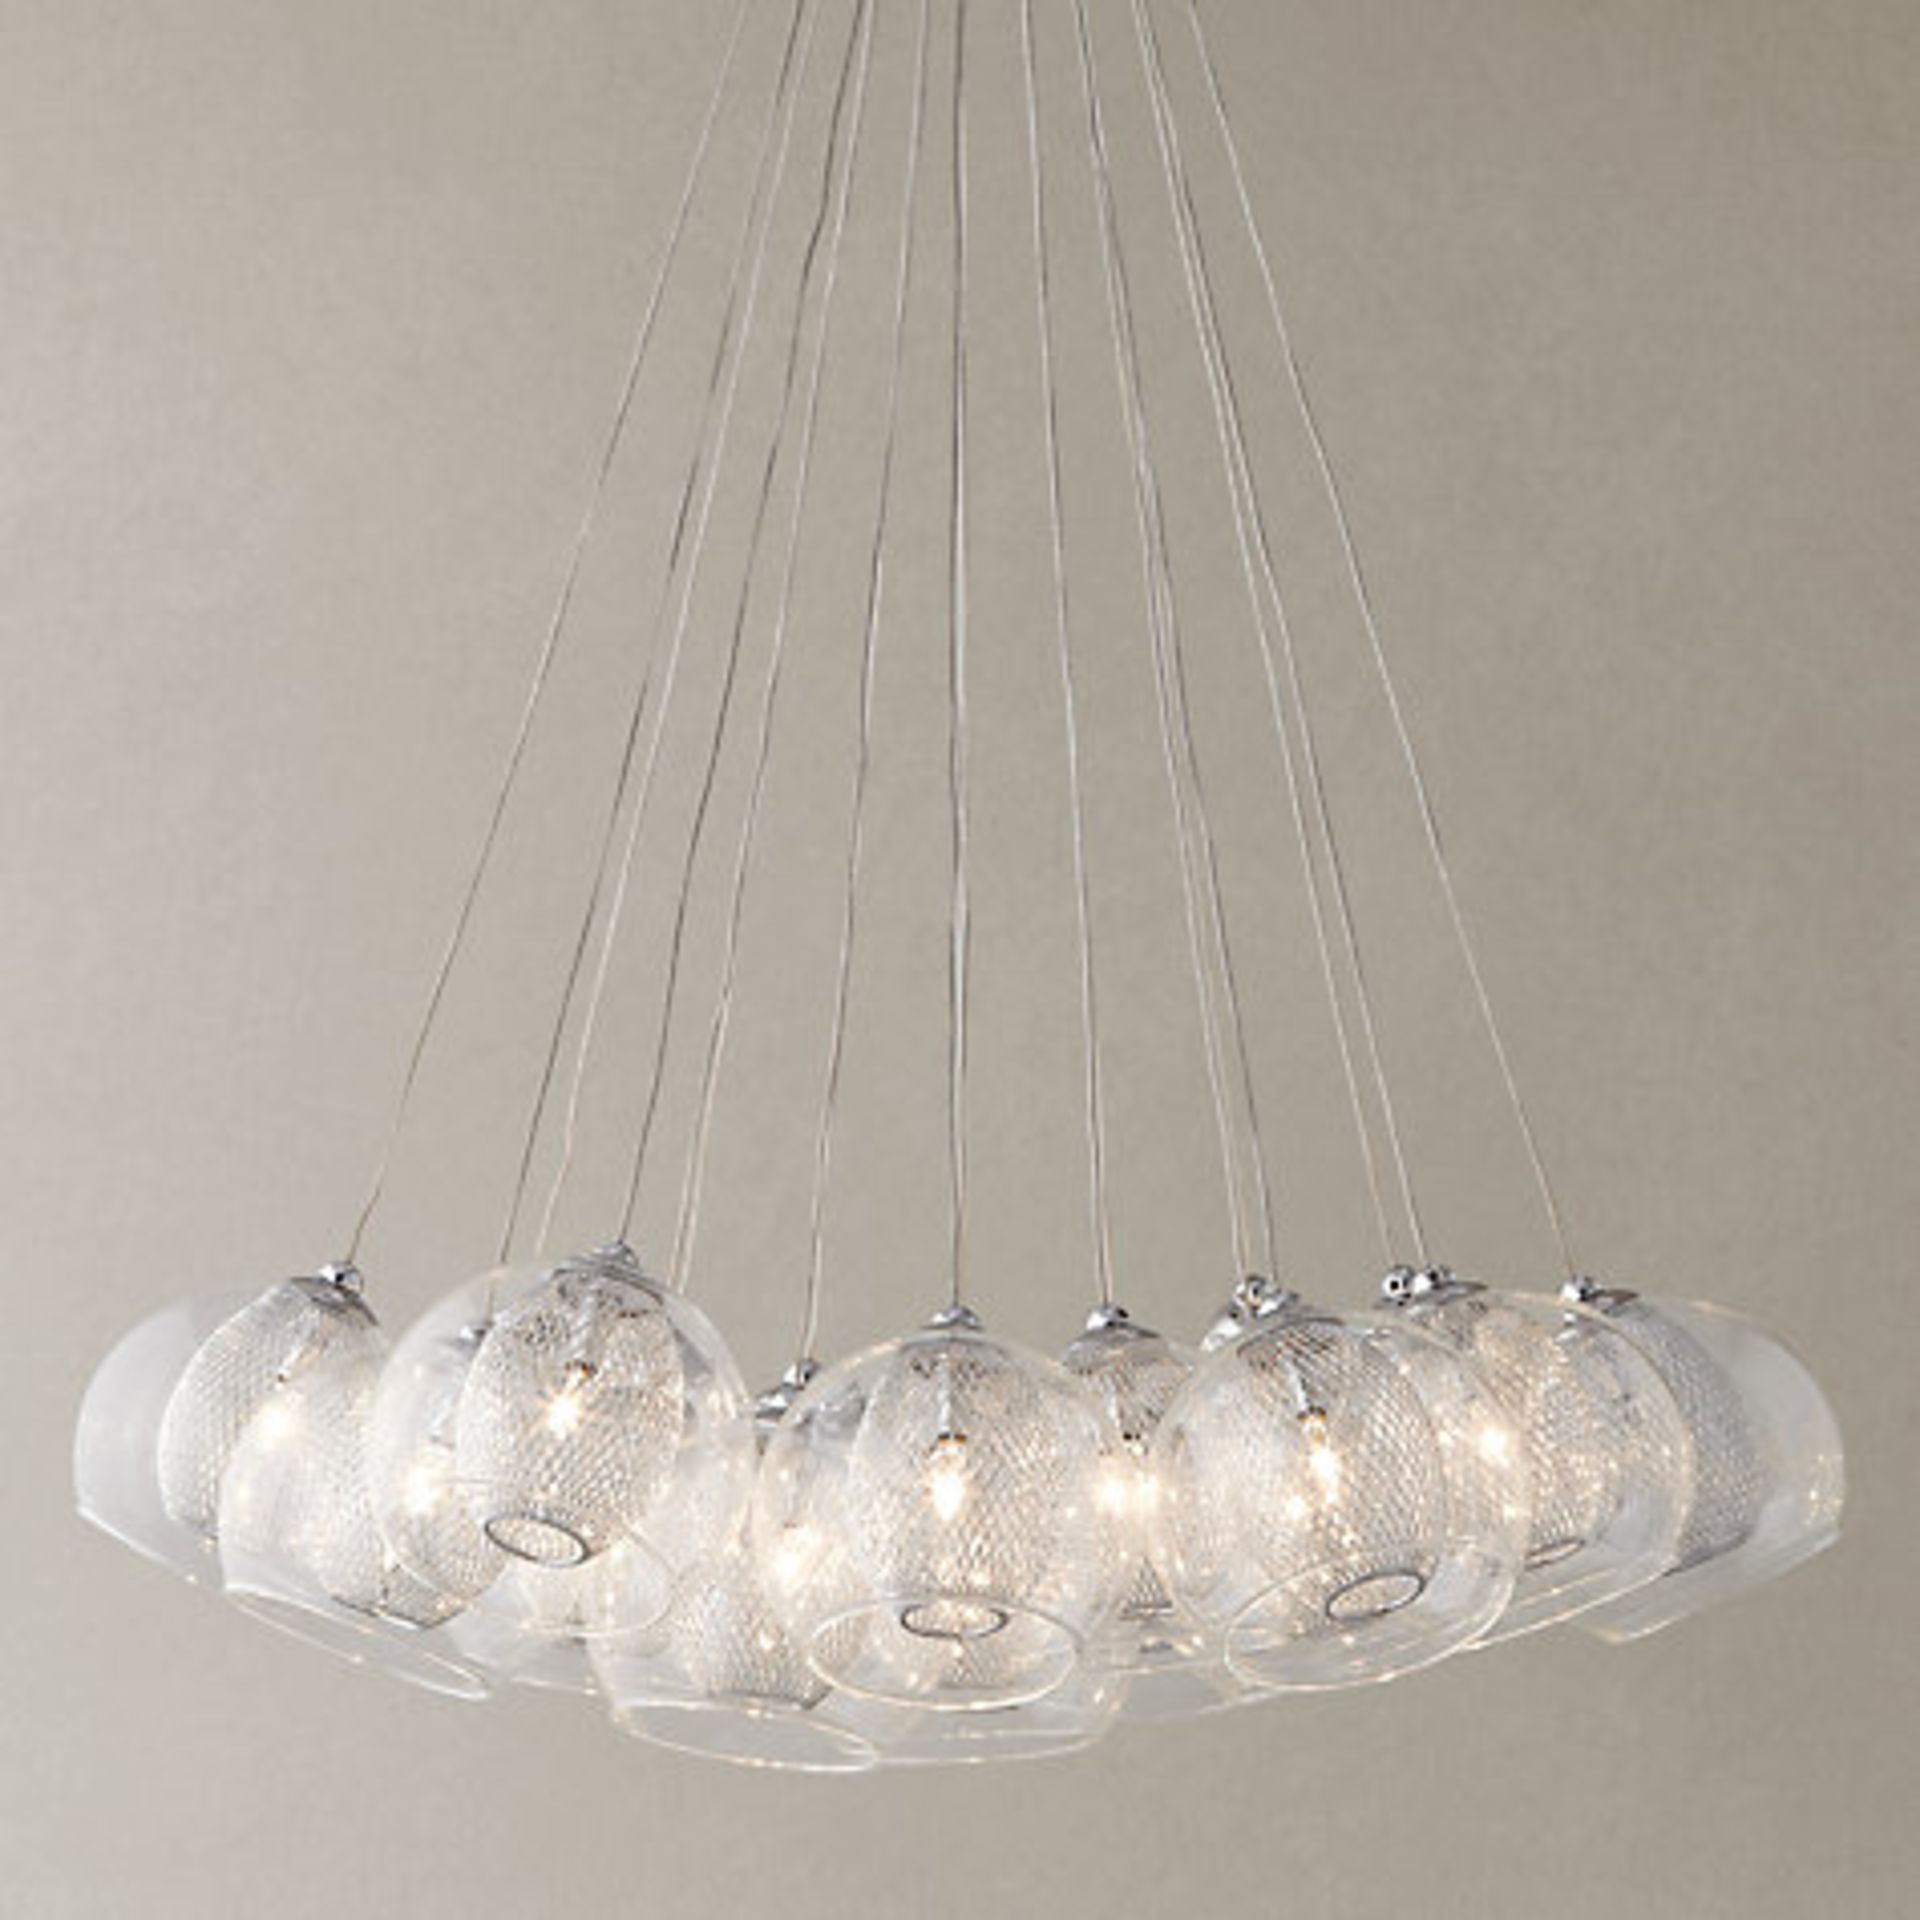 1 x BOXED LEWIS CEILING LIGHT FITTING RRP £195 (22.4.16) *PLEASE NOTE THAT THE BID PRICE IS